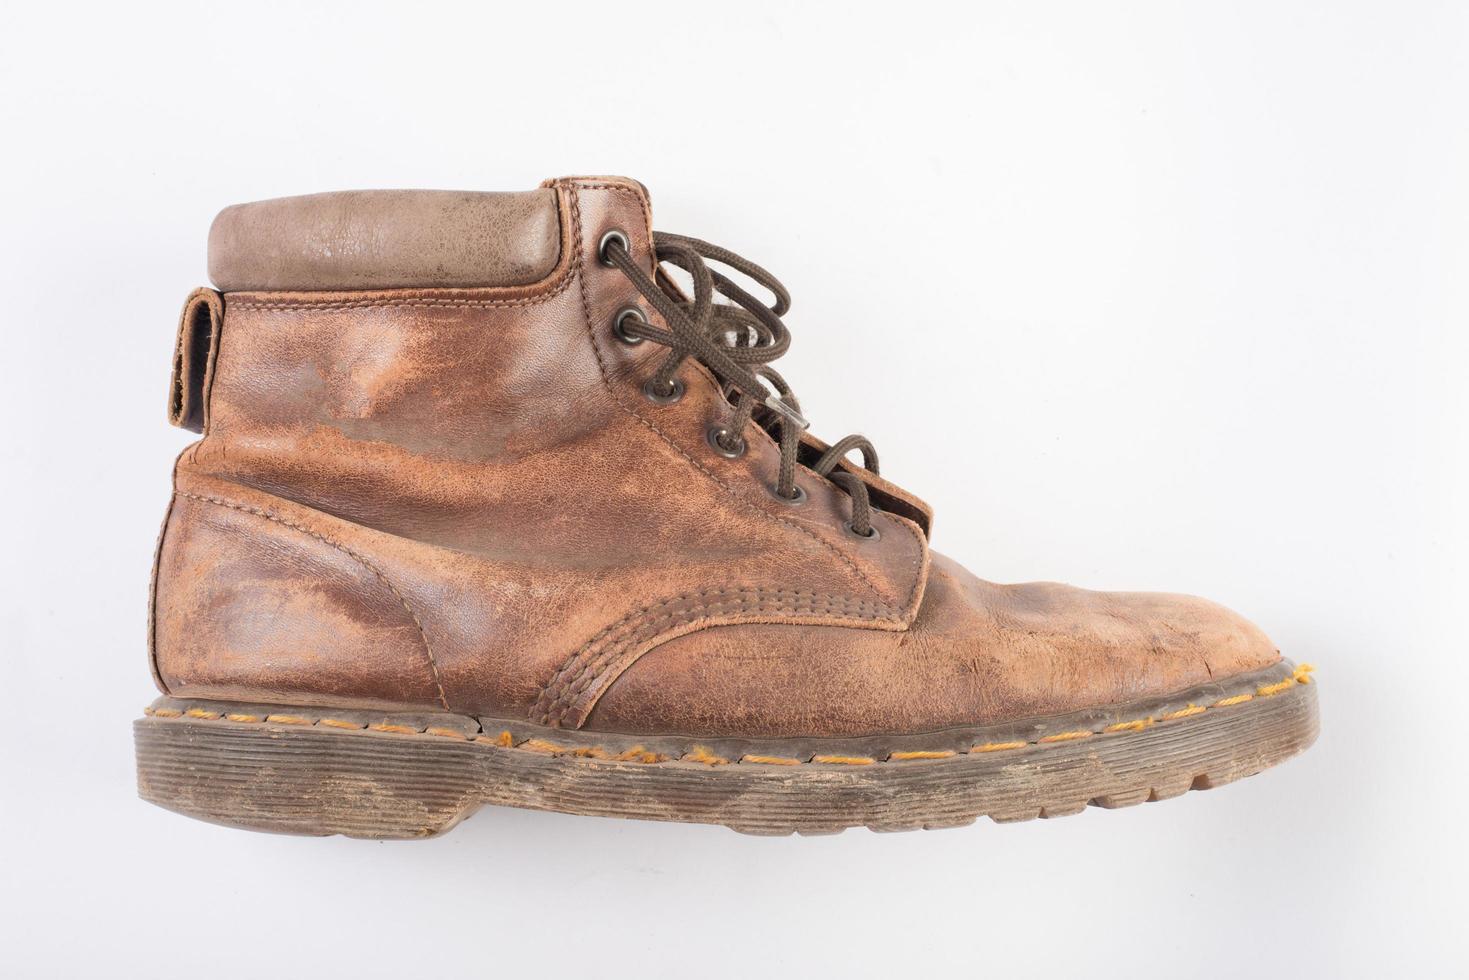 Pair of old brown boots Isolated on a white background photo